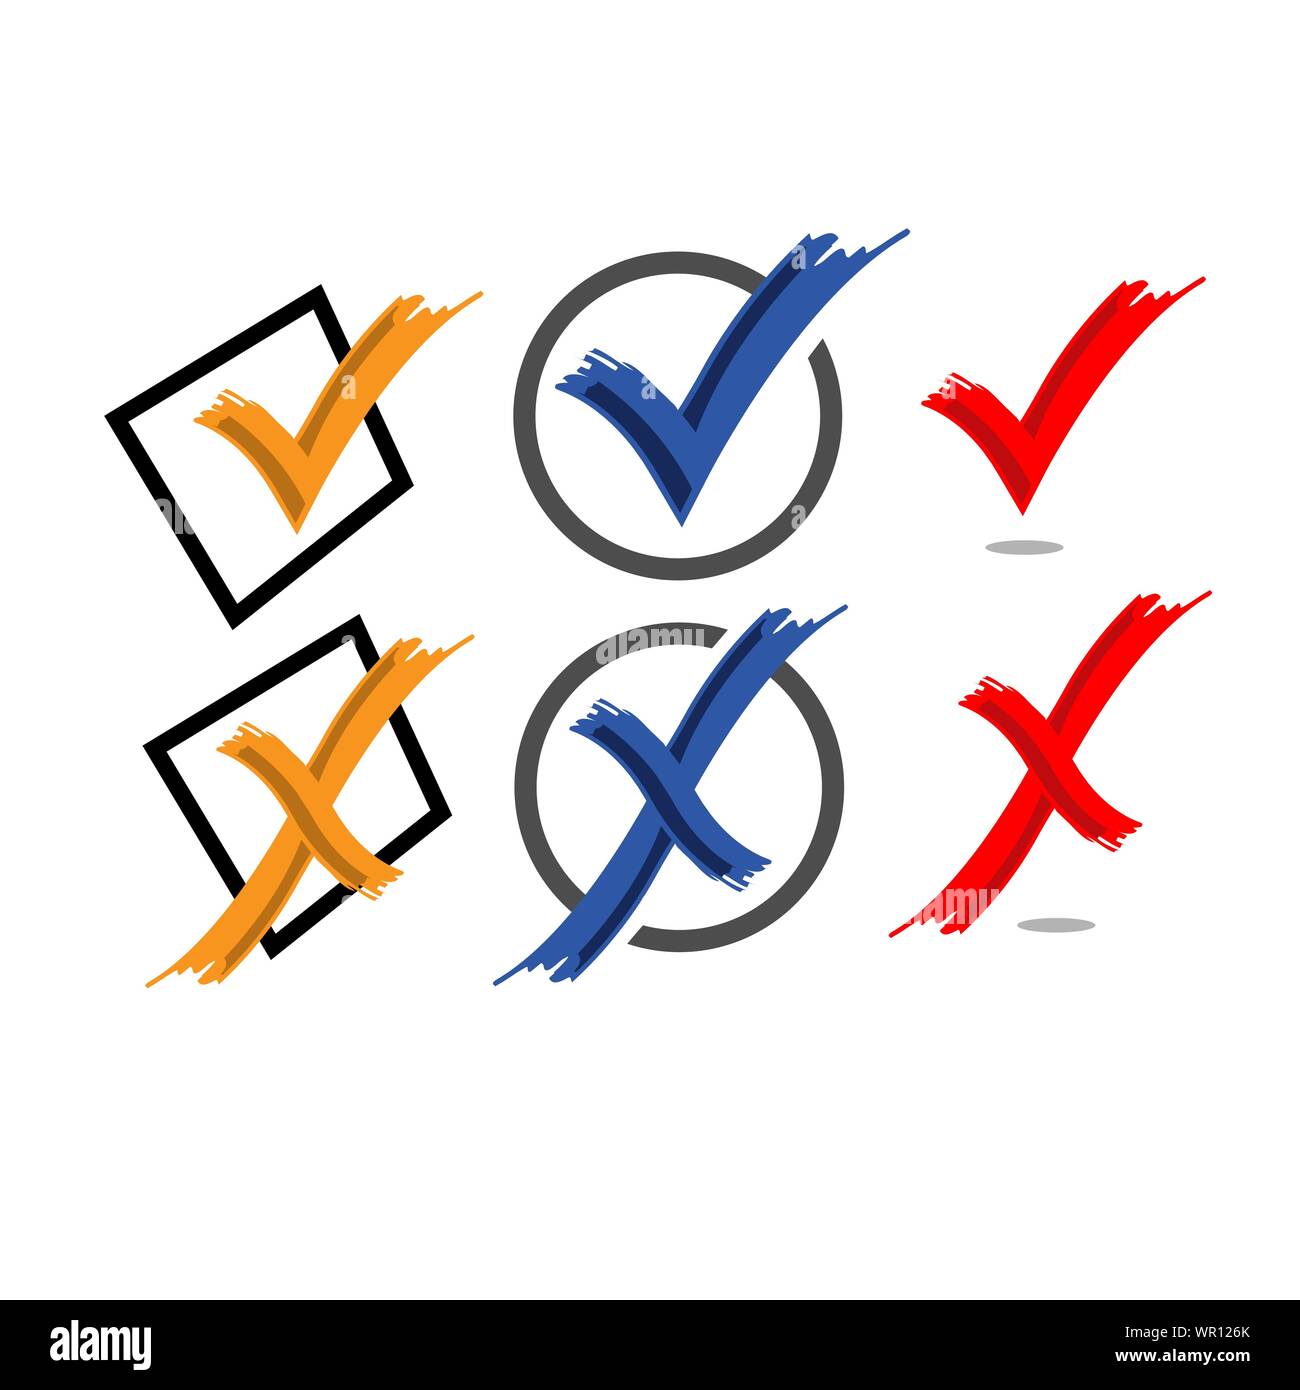 Check mark sign. Yes or No vector. False or True icon in trendy design style Stock Vector